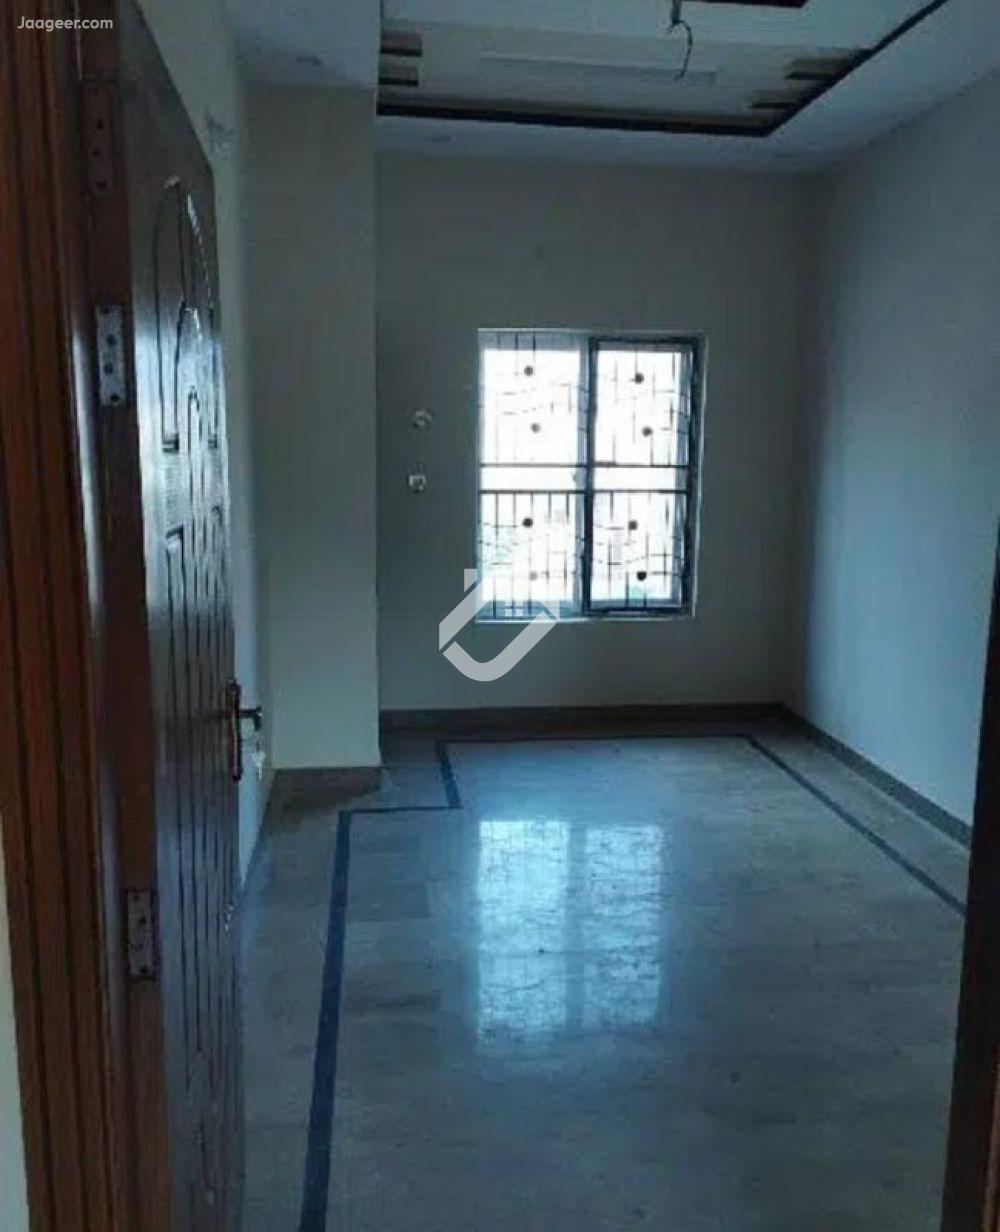 View  2.5 Marla Double Storey House For Sale In Alif Town in Alif Town, Sheikhupura